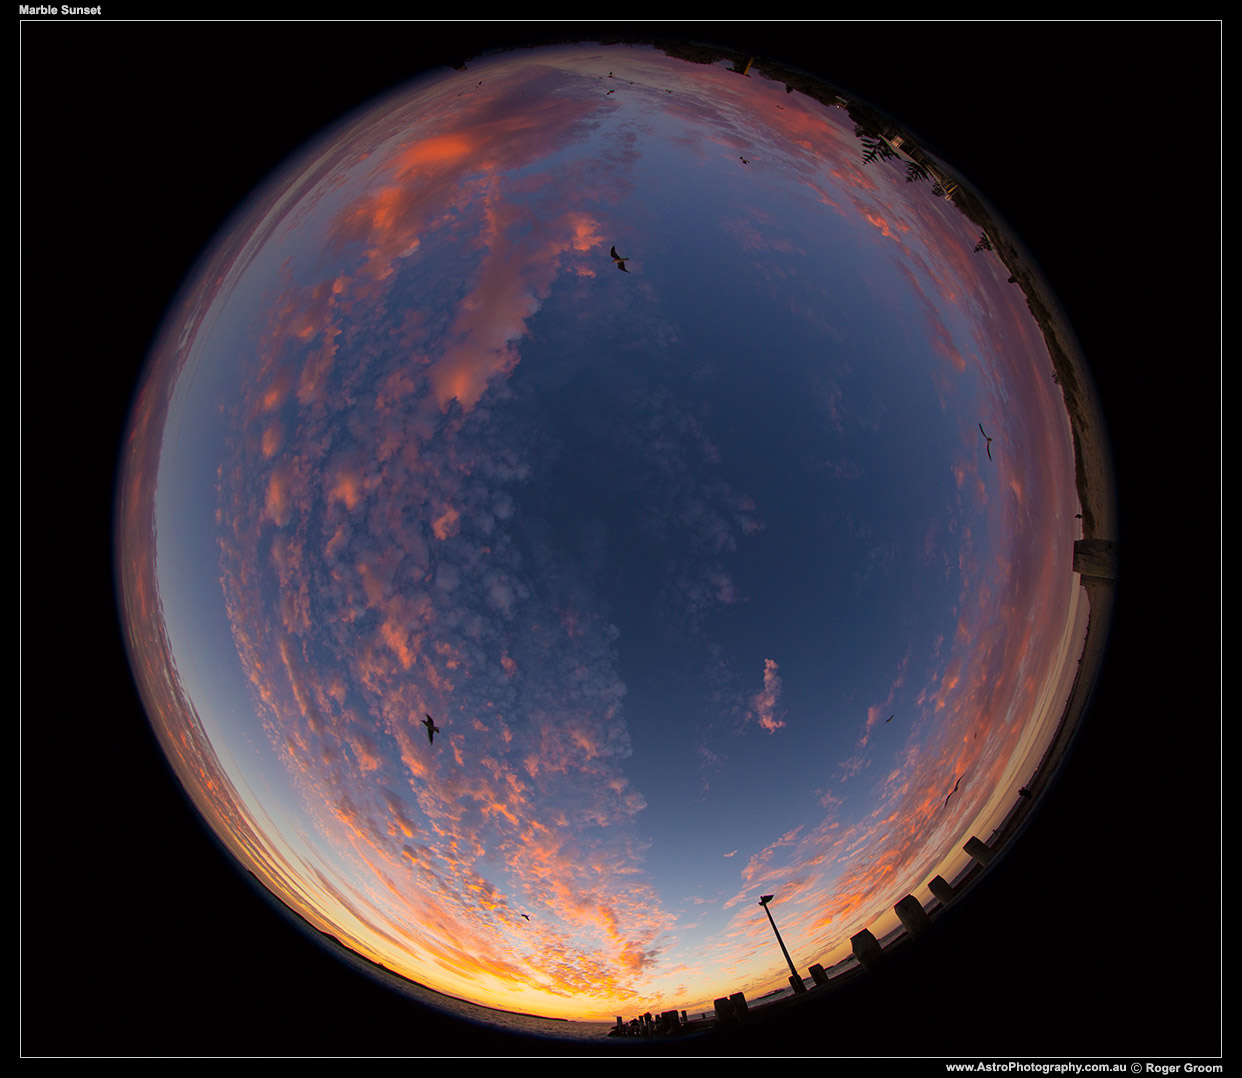 Marble Sunset. A fun fisheye photograph of sunset with seagulls flying overhead.